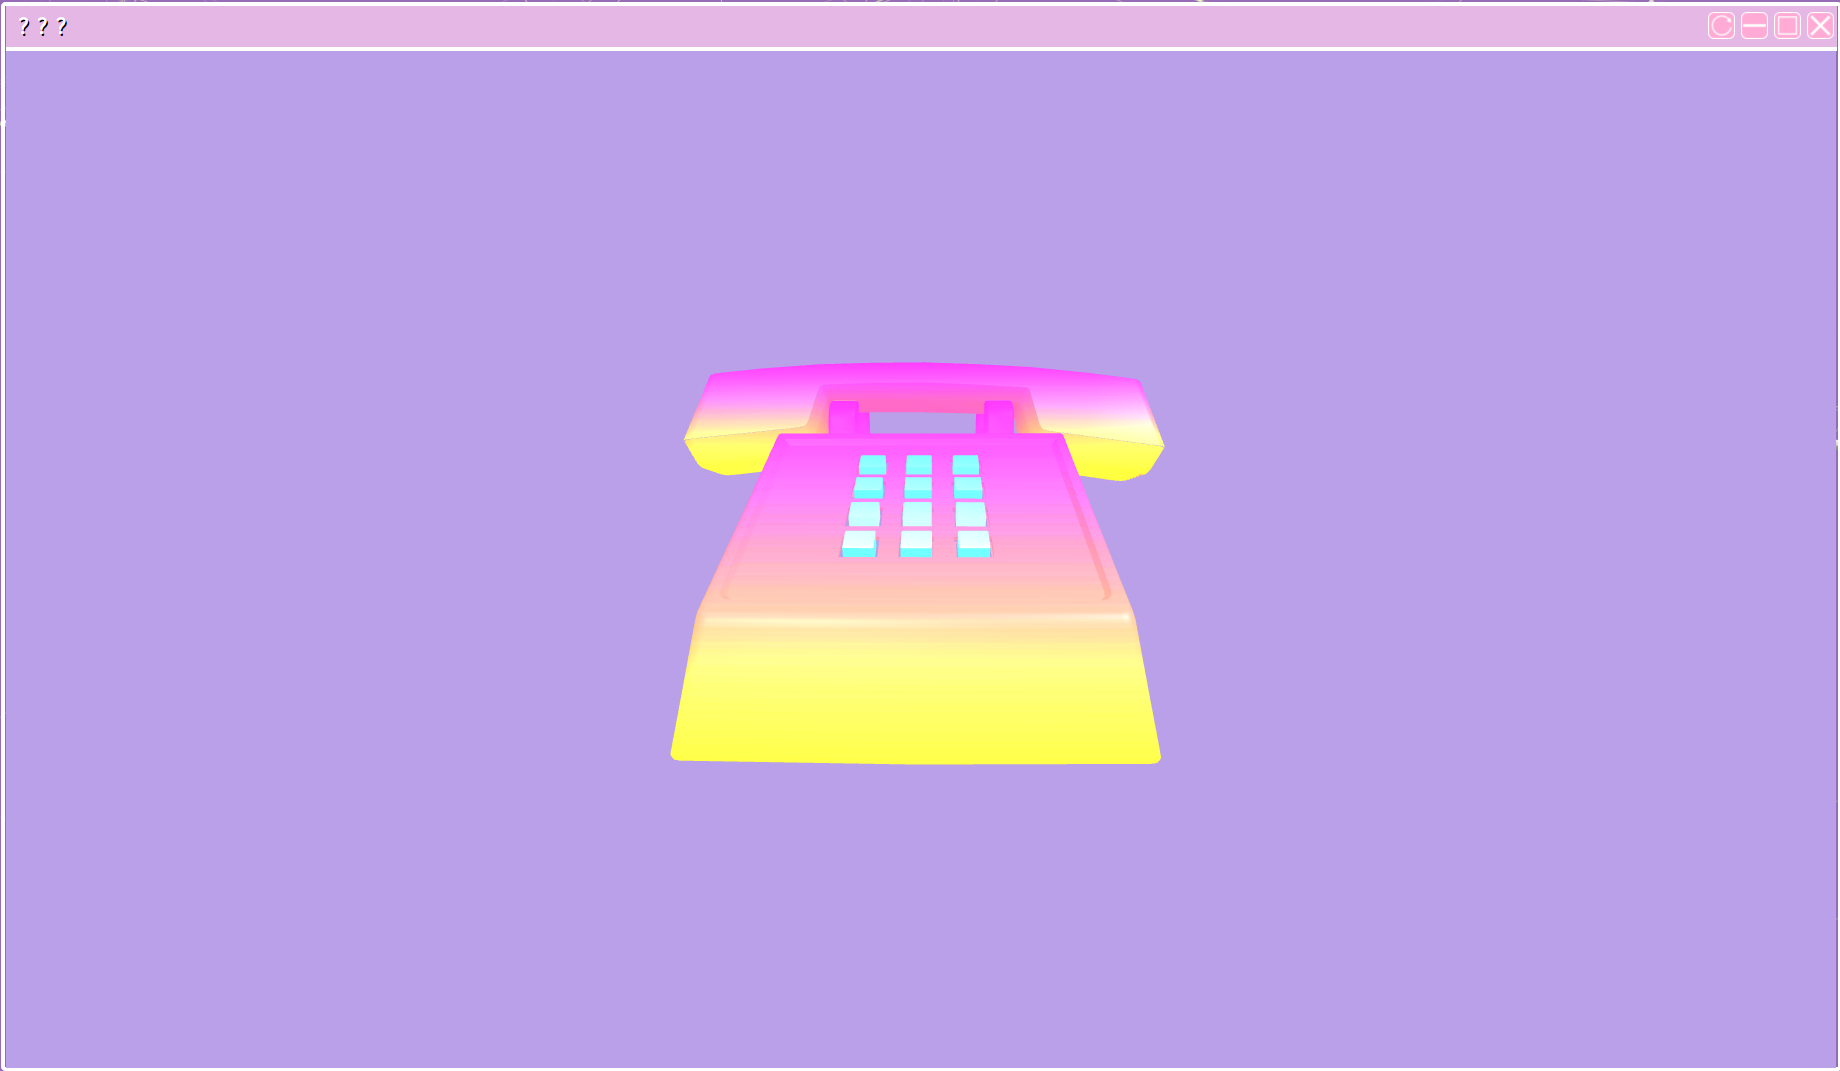 A pink and yellow illustration of a traditional telephone on a purple background